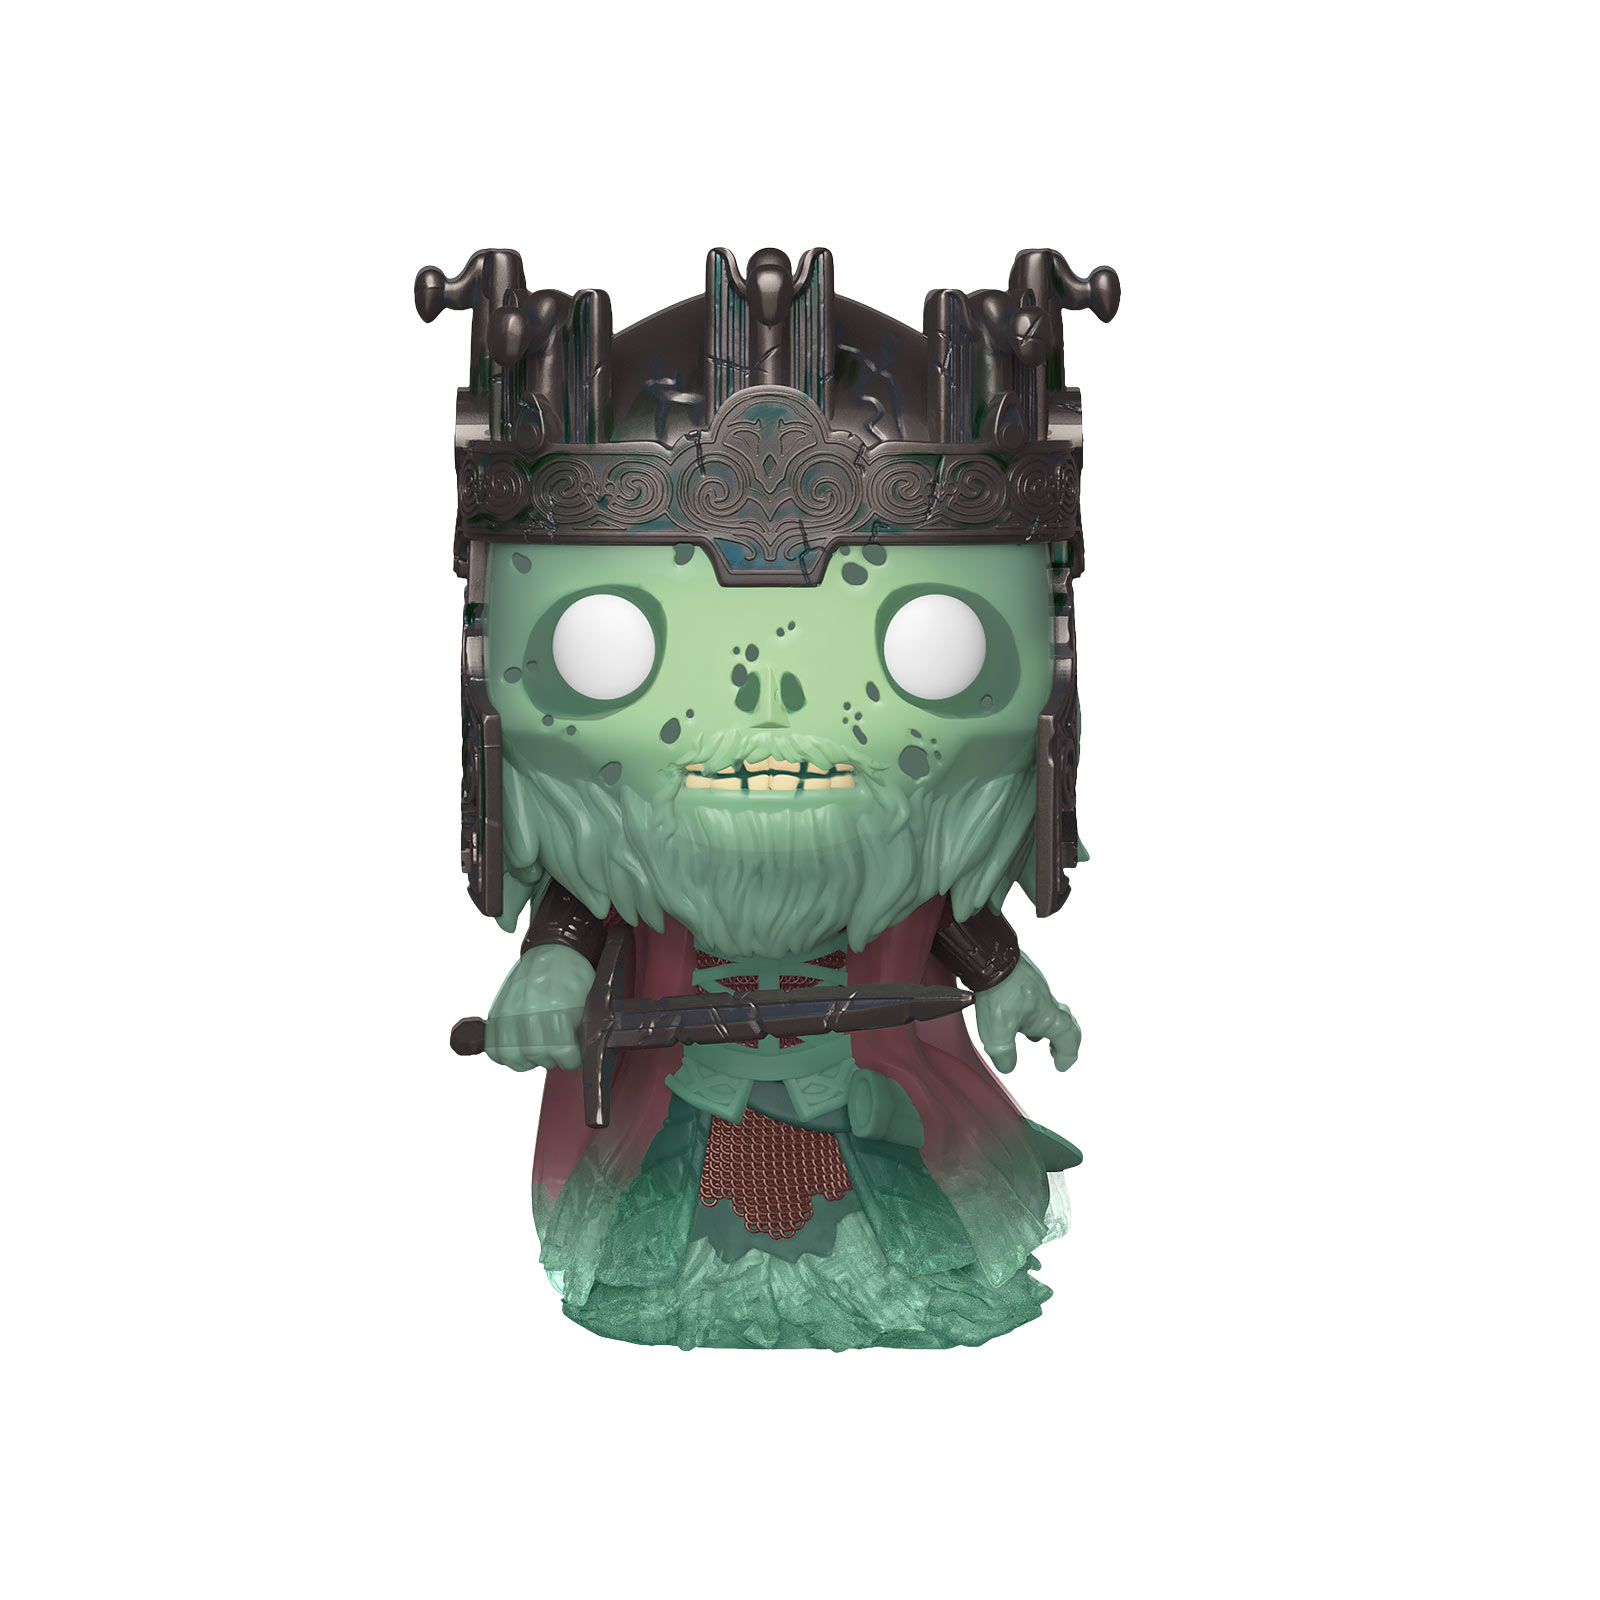 Lord of the Rings - King of the Dead Funko Pop Figurine